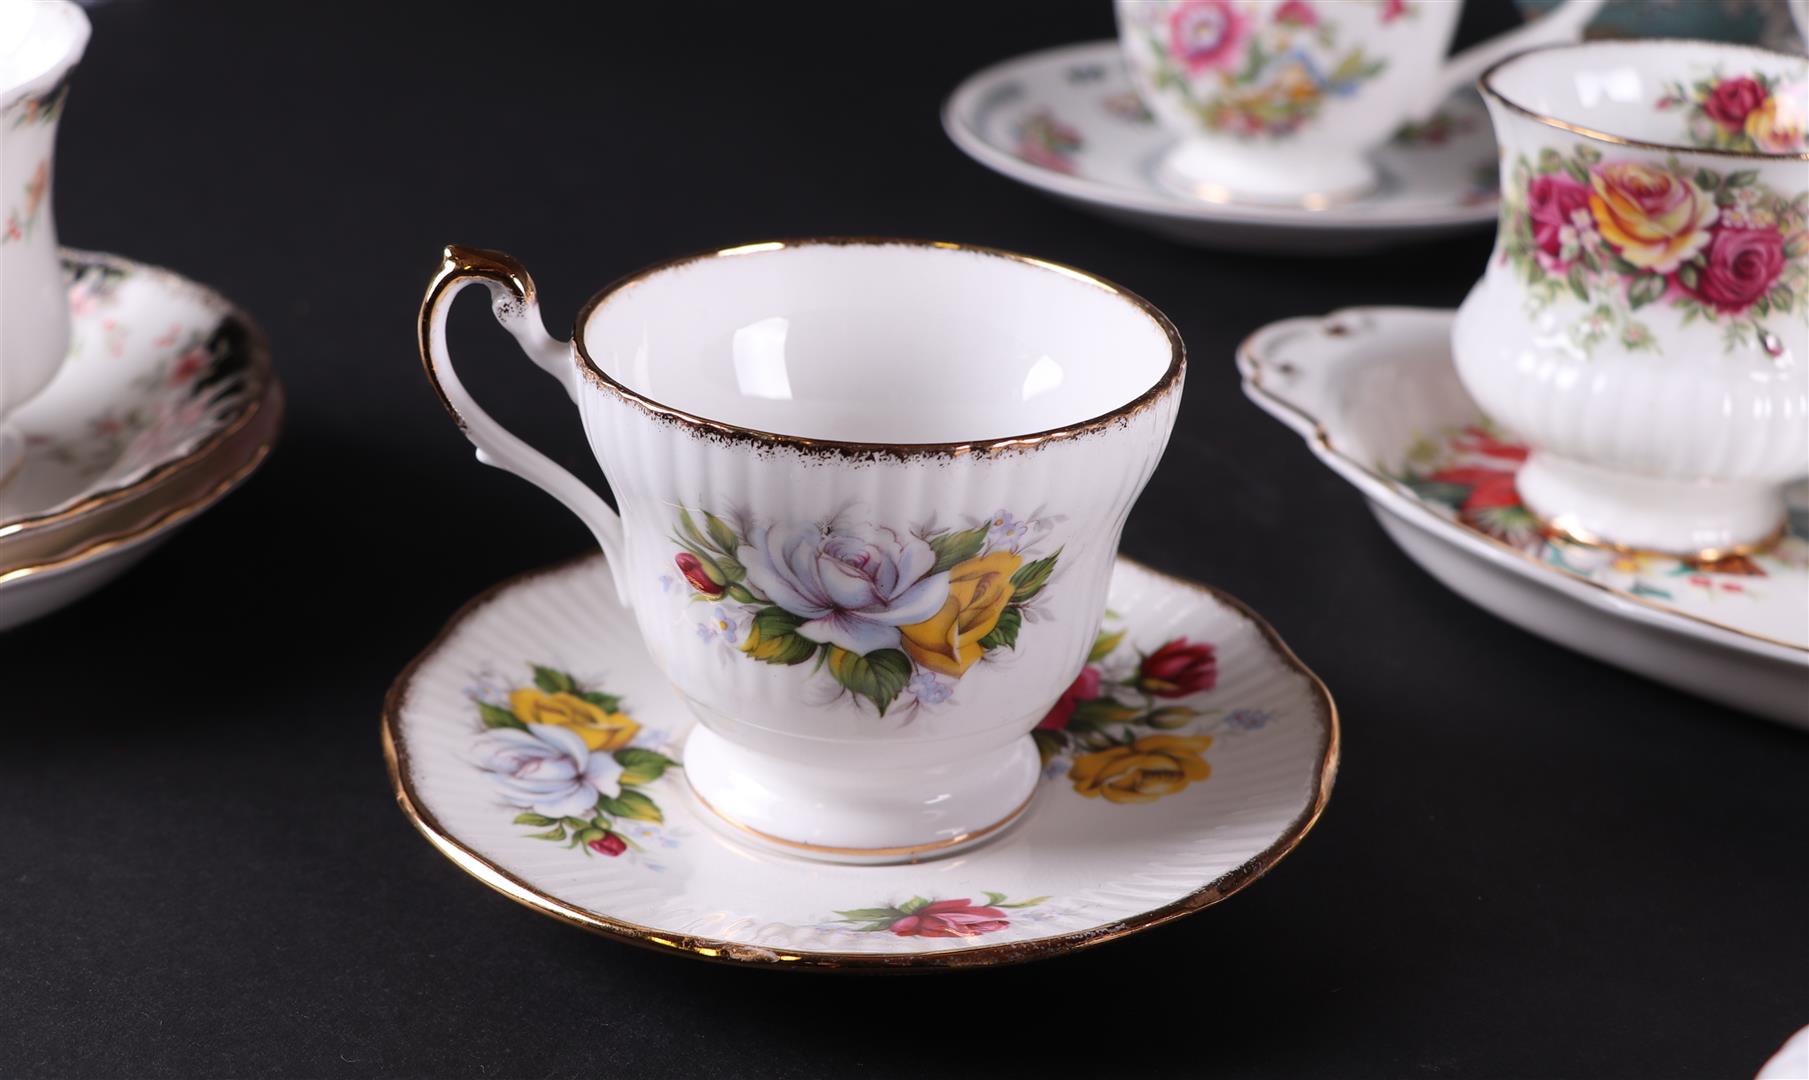 An extensive  lot  with various "Royal Albert" cups and saucers. - Image 11 of 12